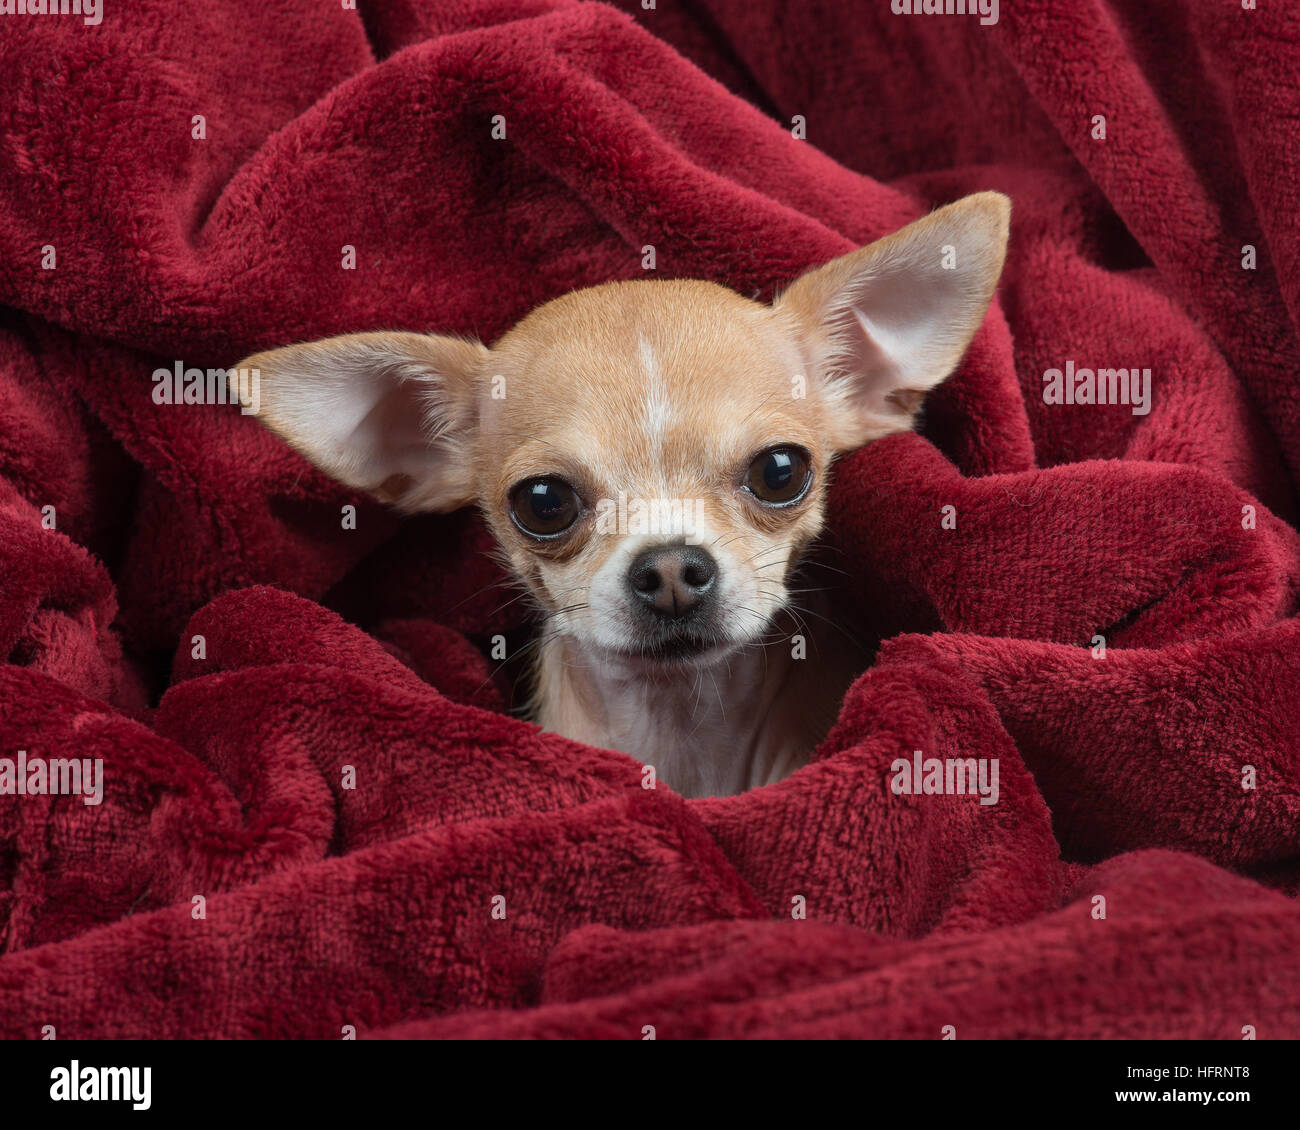 Cute chihuahua wrapped in a deep red velvet blanket Stock Photo